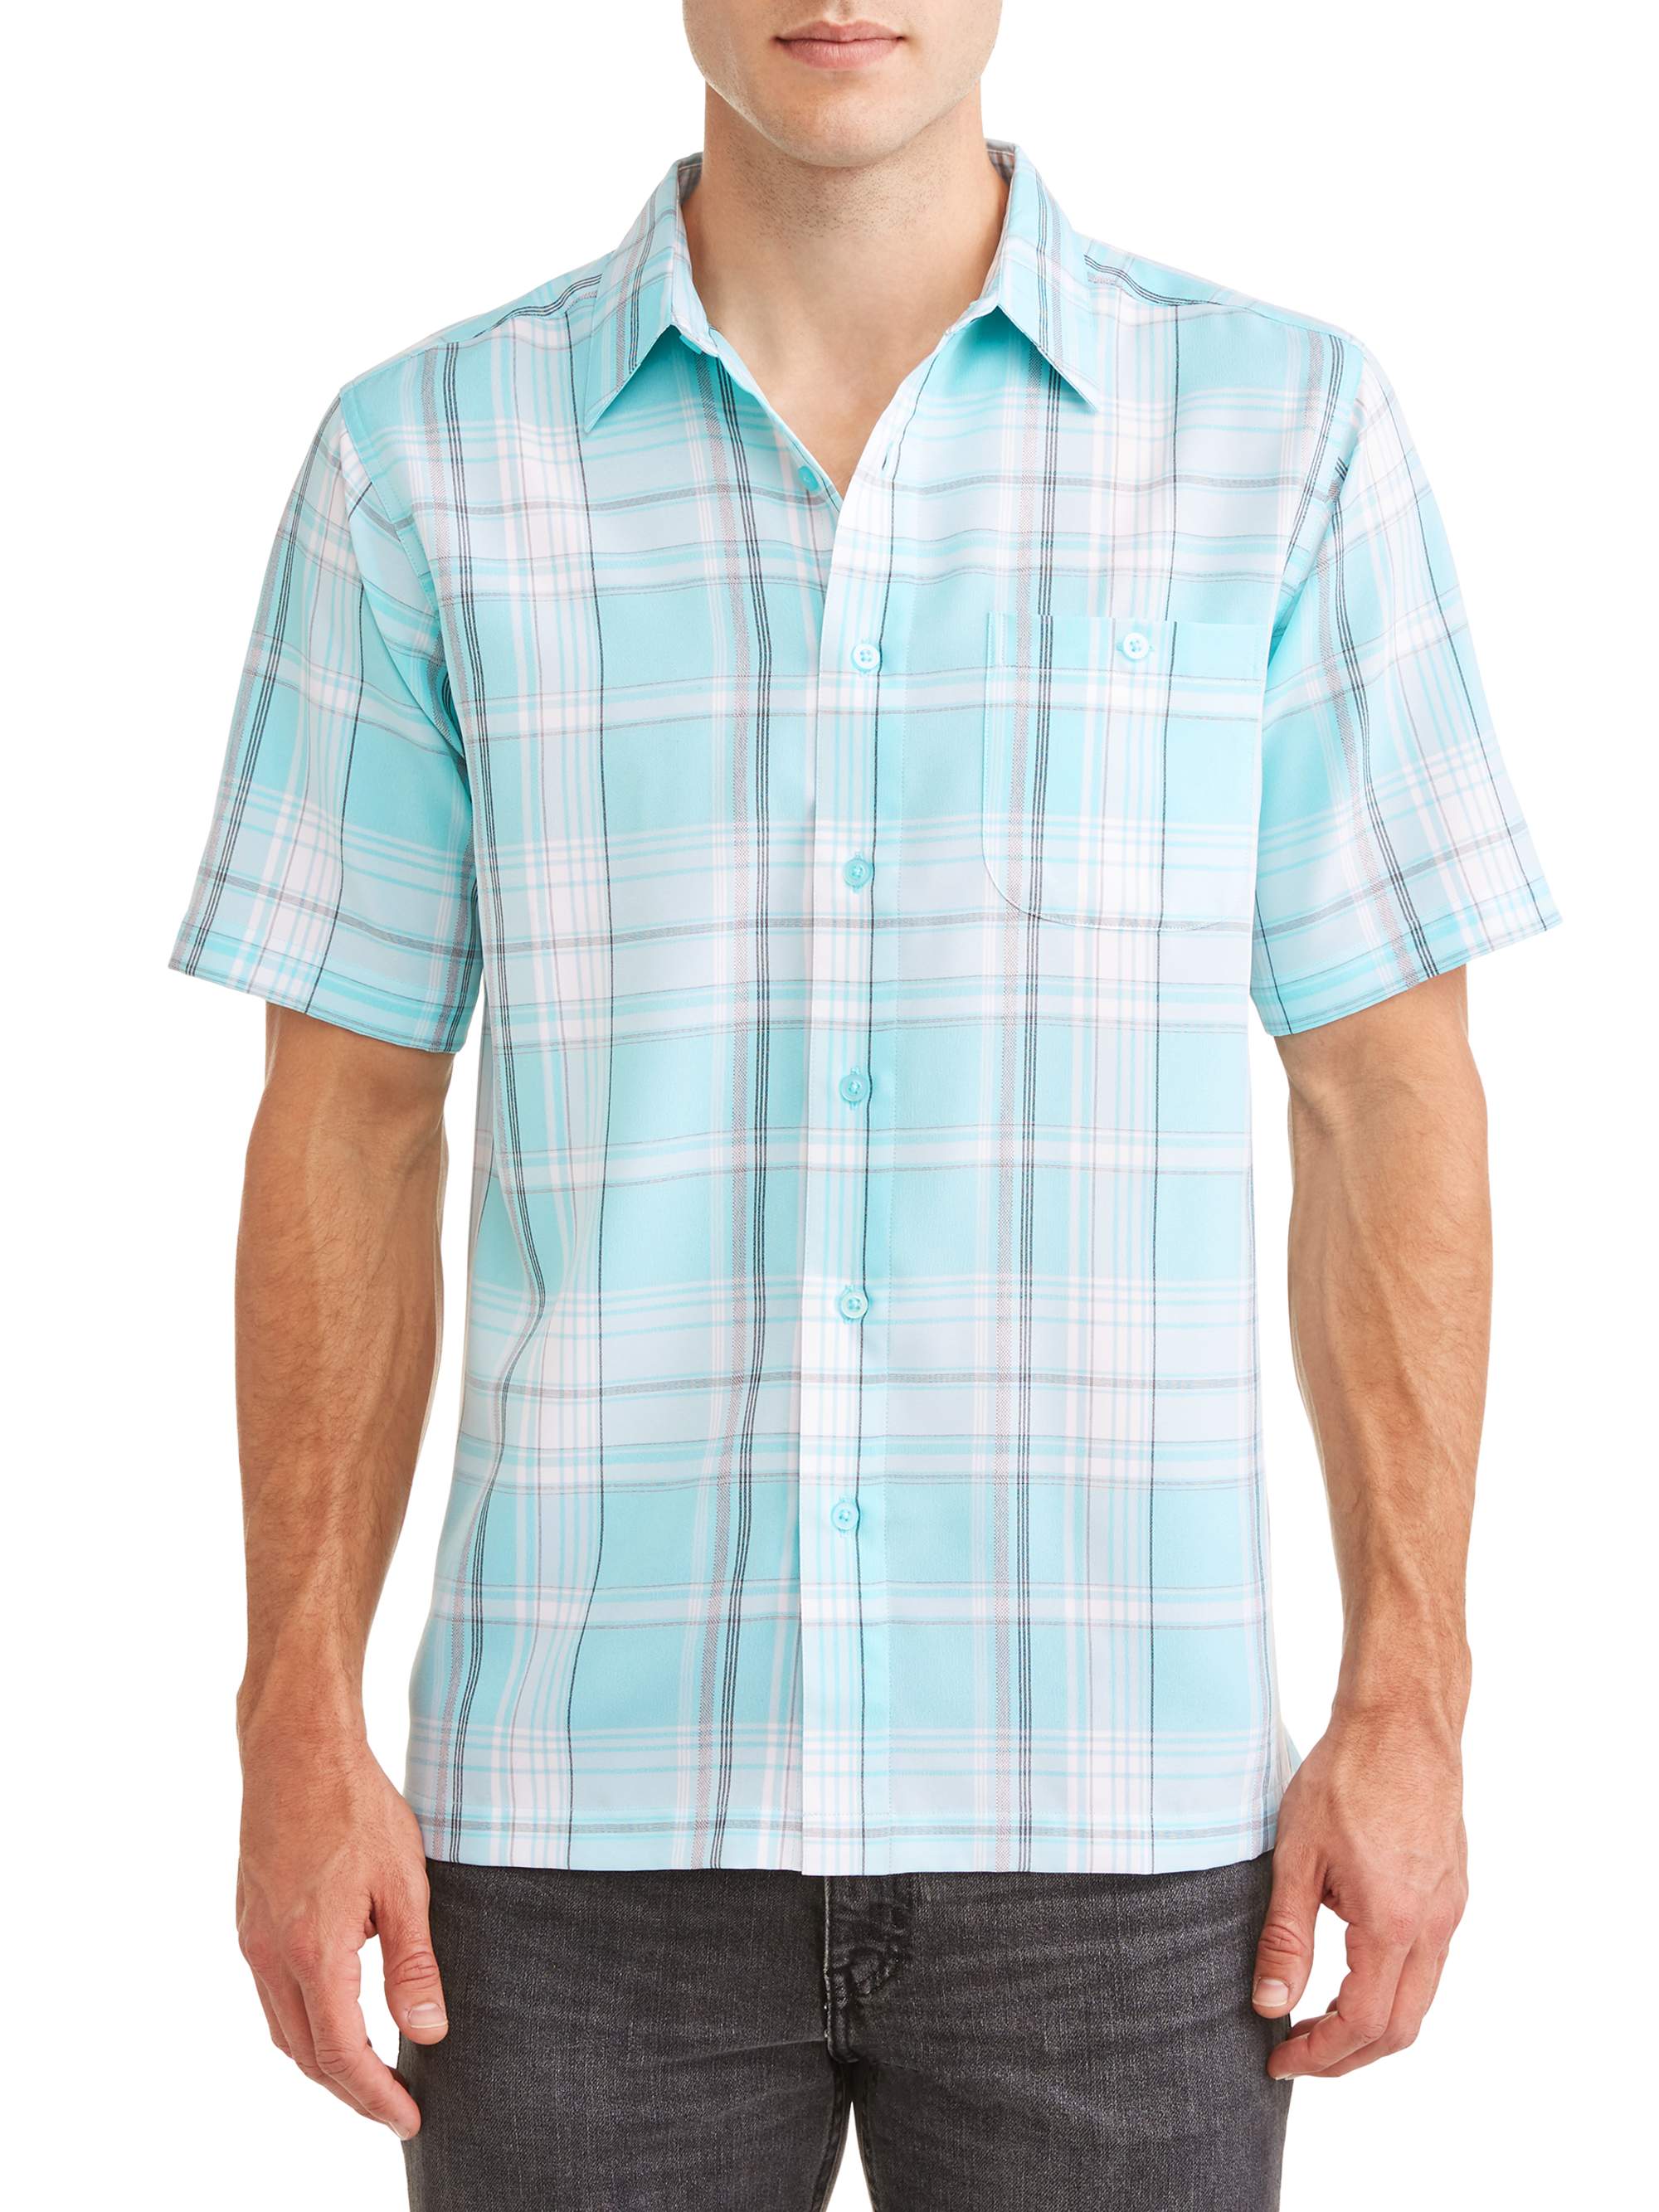 George Men's and Big Men's Short Sleeve Microfiber Shirt, up to size ...